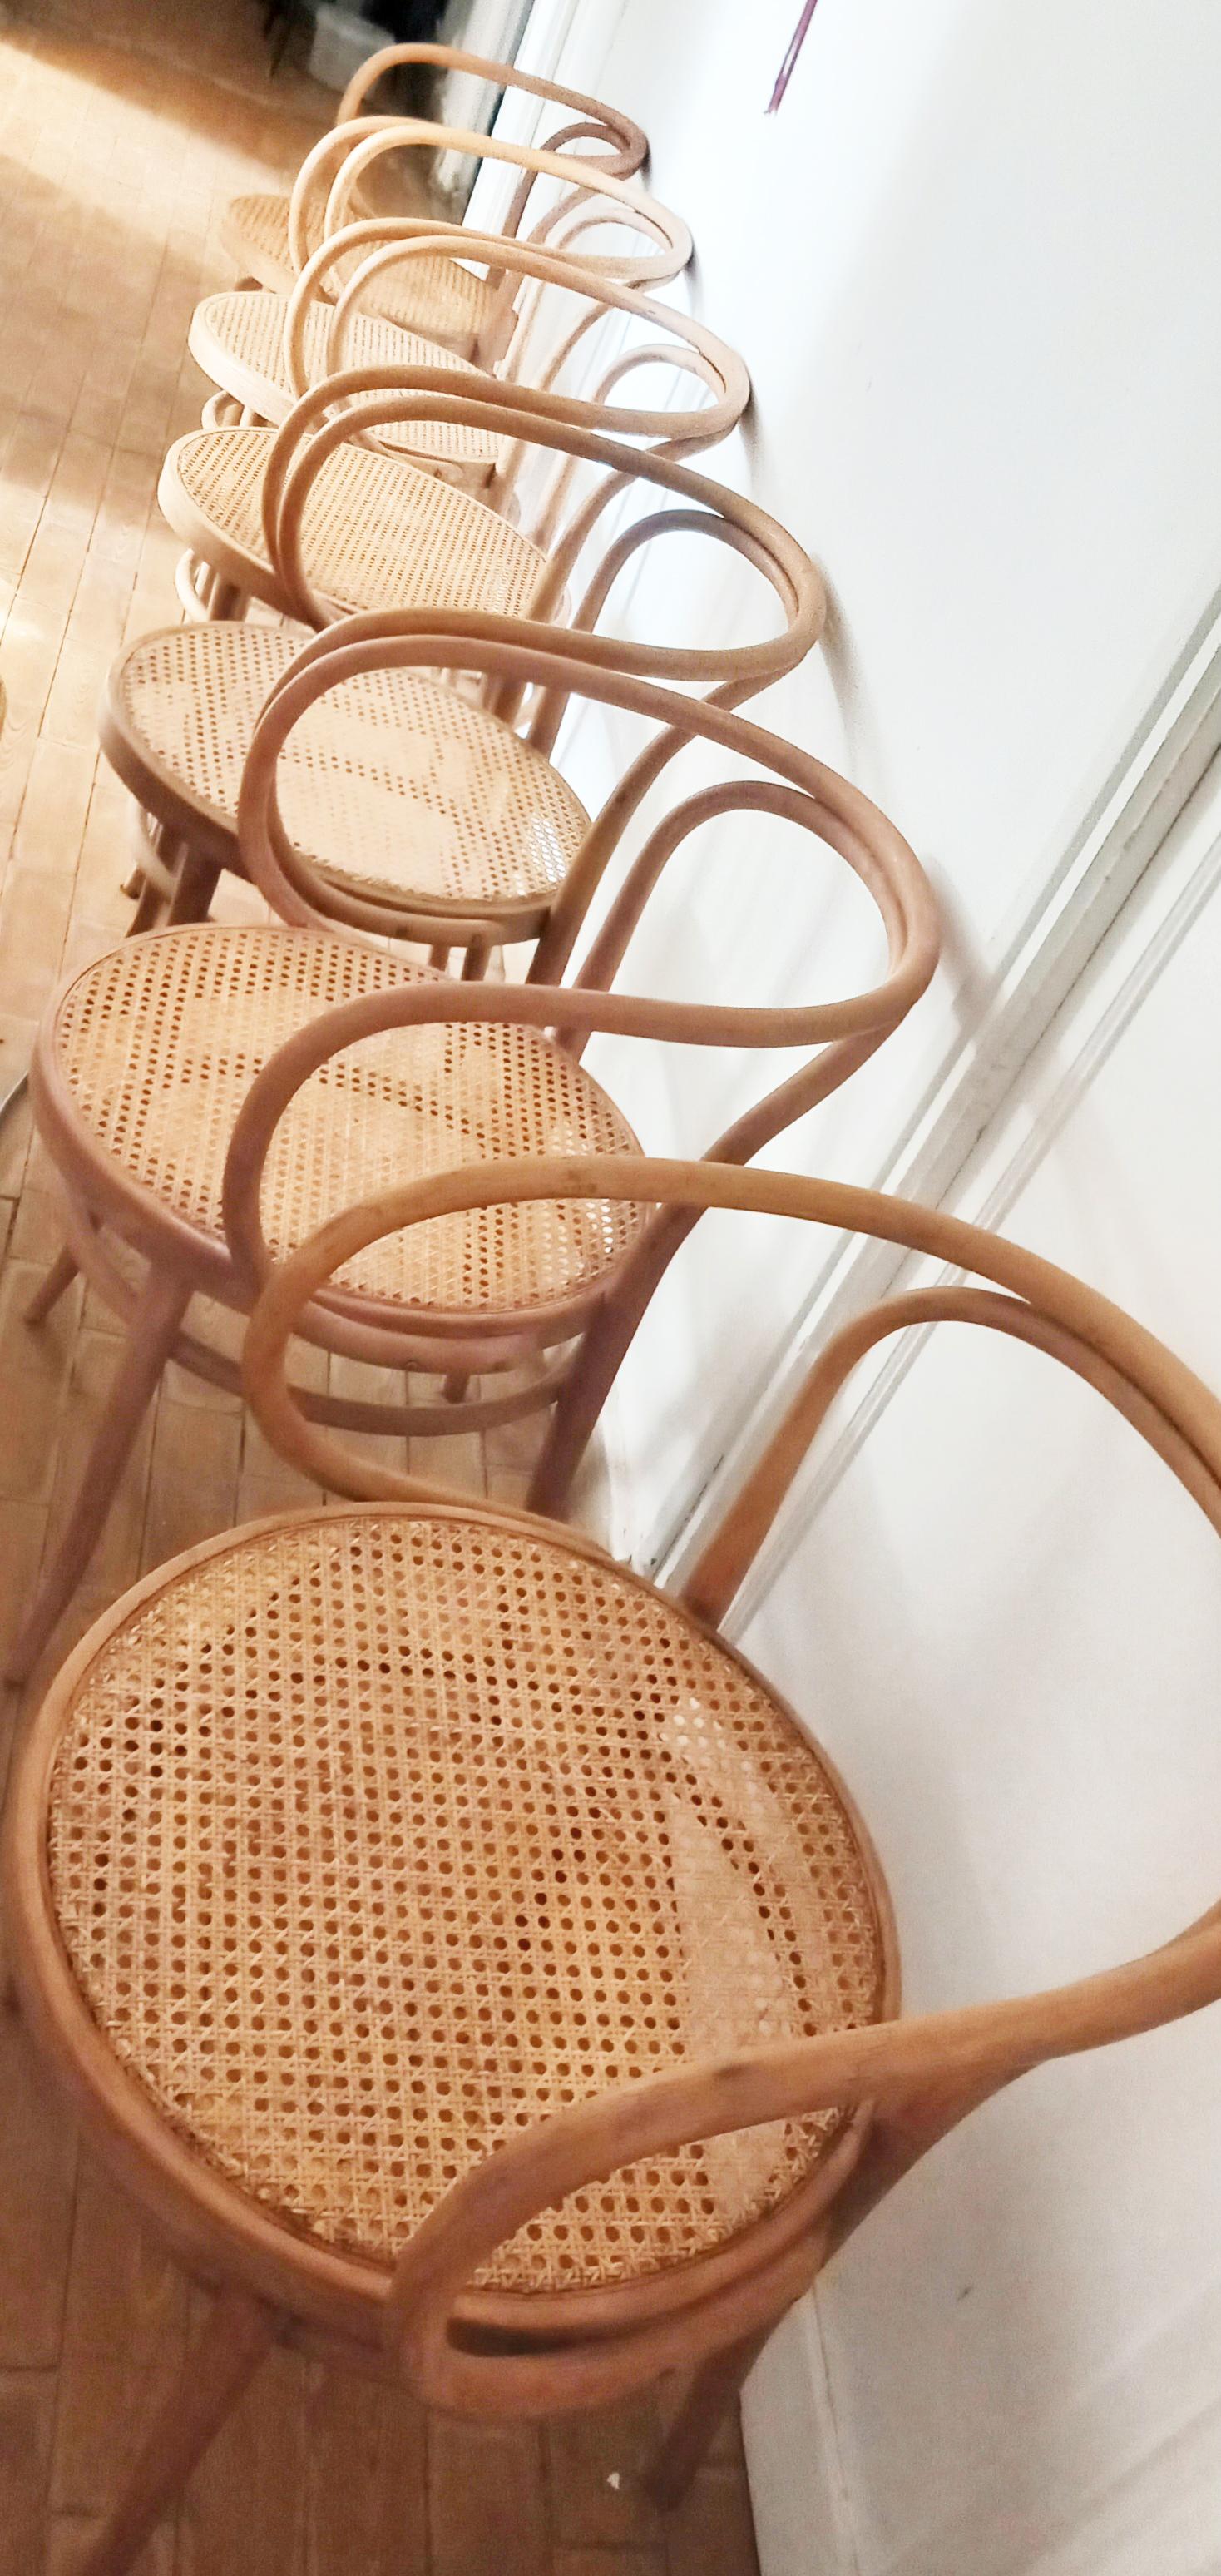 Czech Six Midcentury Cane Bentwood Chair After Thonet 209, 1950s For Sale